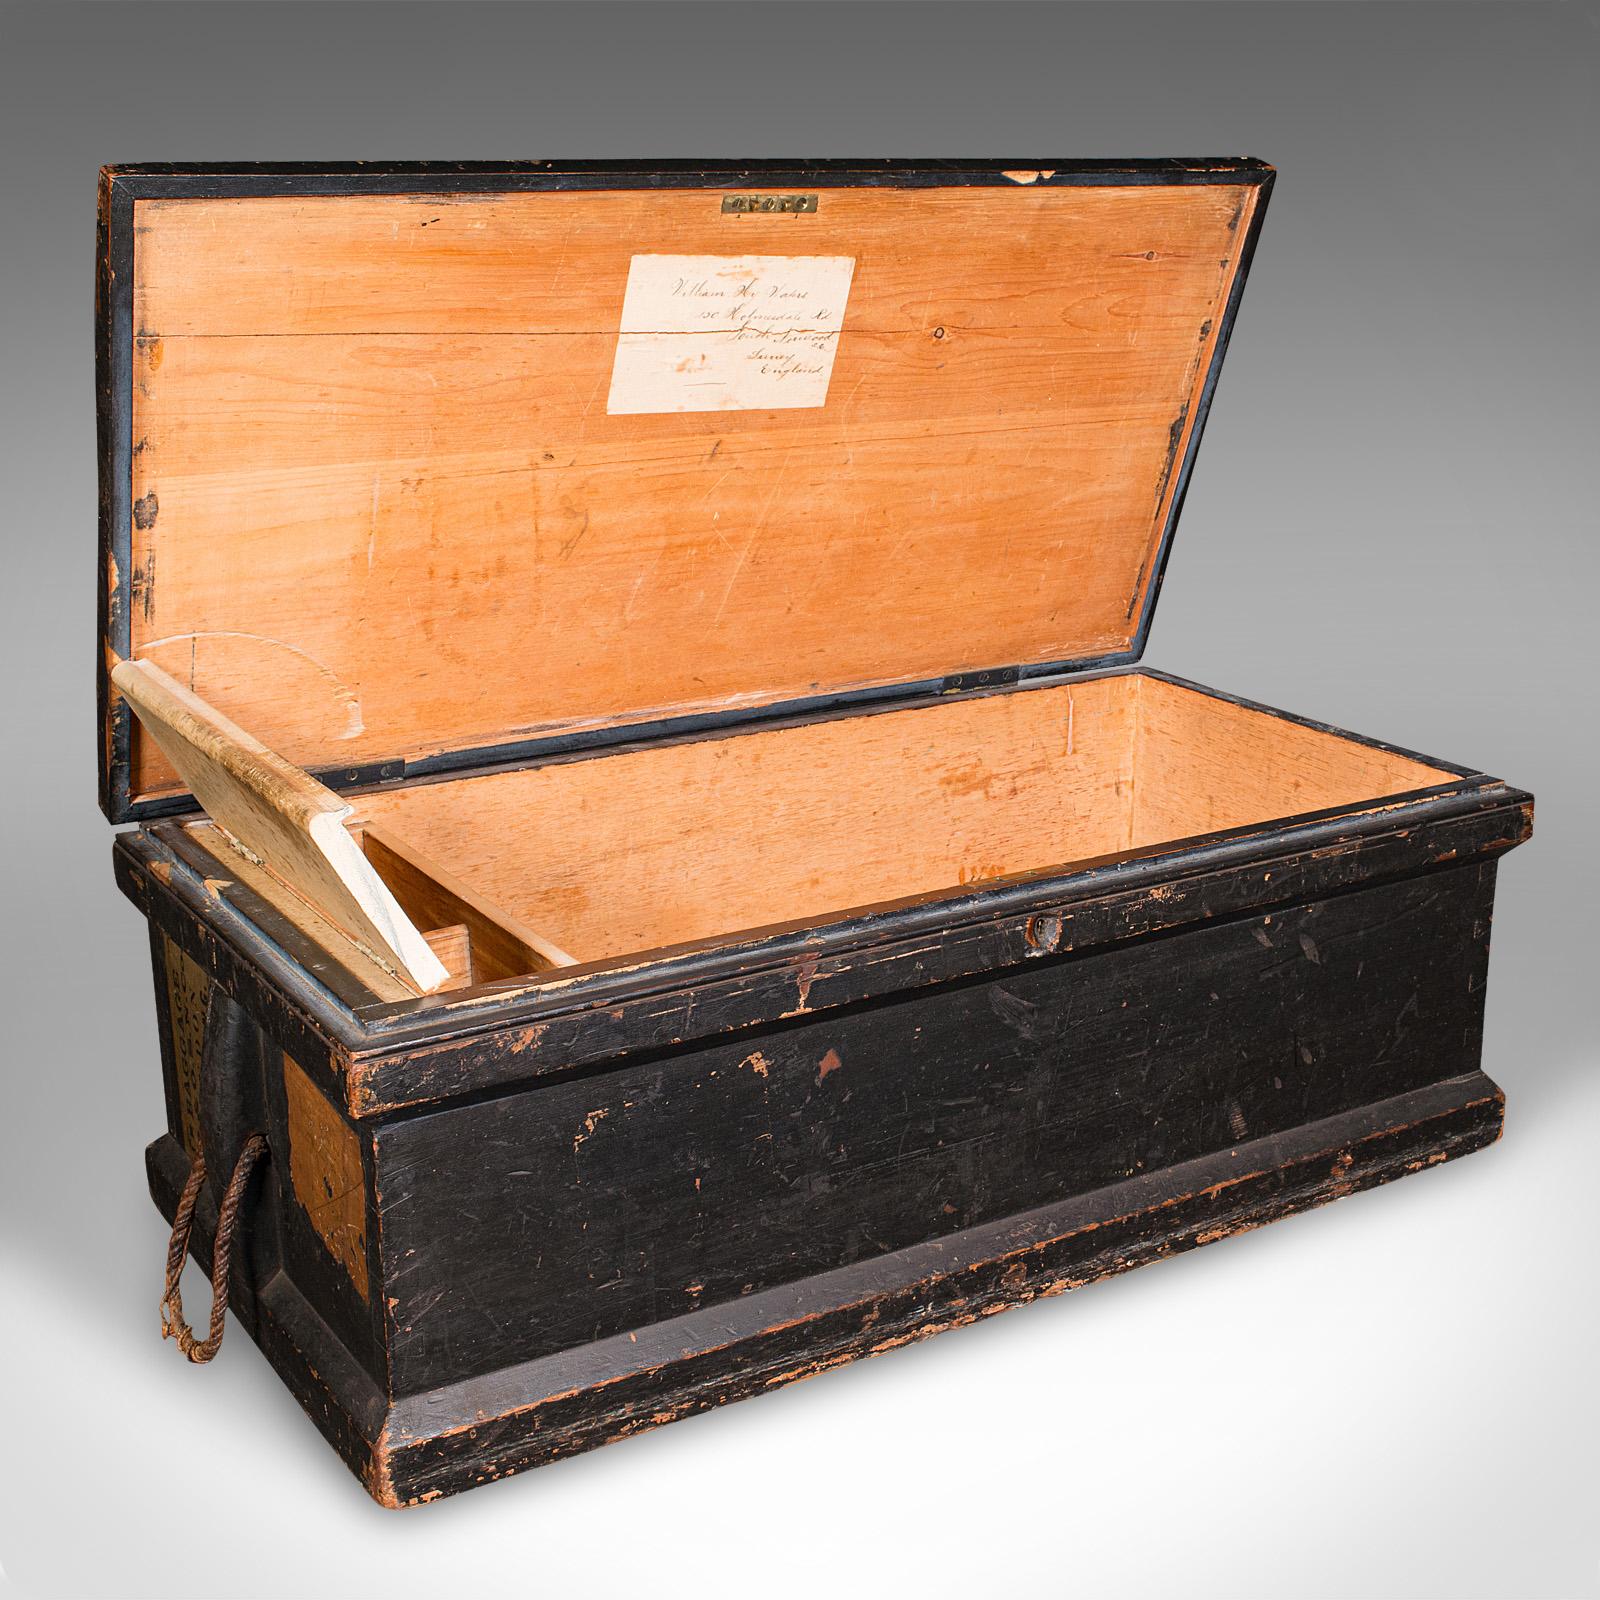 This is an antique shipwright's chest. An English, stained pine workman's trunk, dating to the late Victorian period, circa 1900.

Pleasingly aged maritime chest, with a fascinating appearance
Displays a desirable aged patina throughout
Robust,